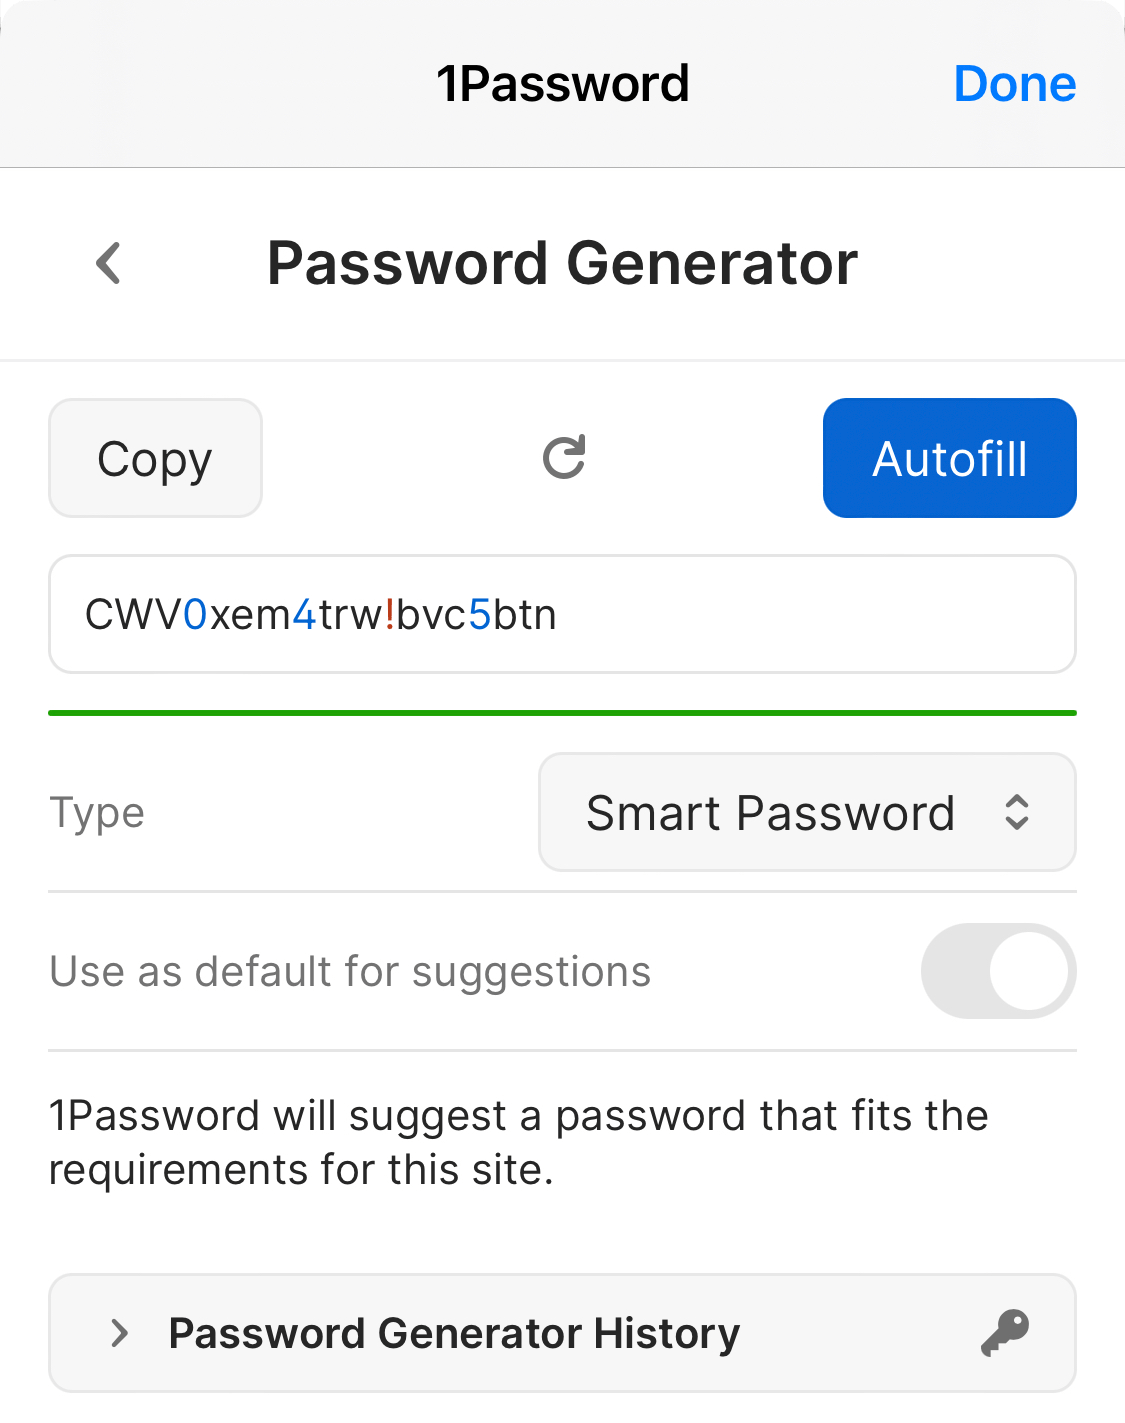 The Password Generator in 1Password for Safari showing a Smart Password suggestion.